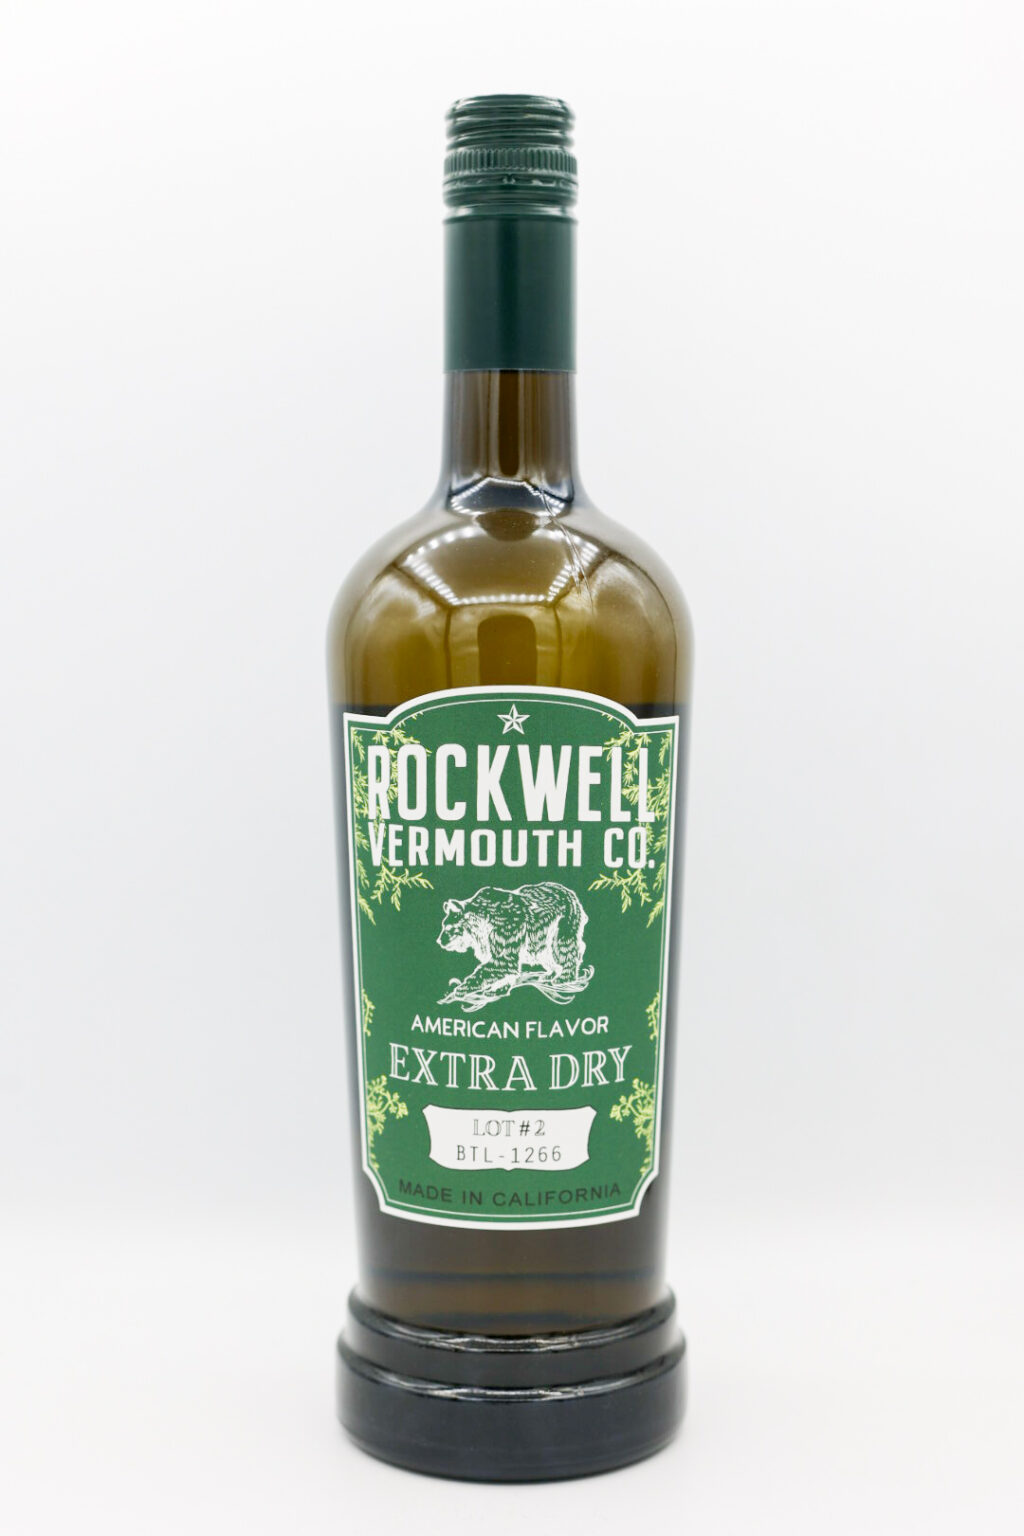 Rockwell Vermouth Co. Extra Dry Vermouth Lot No. 1 750ml